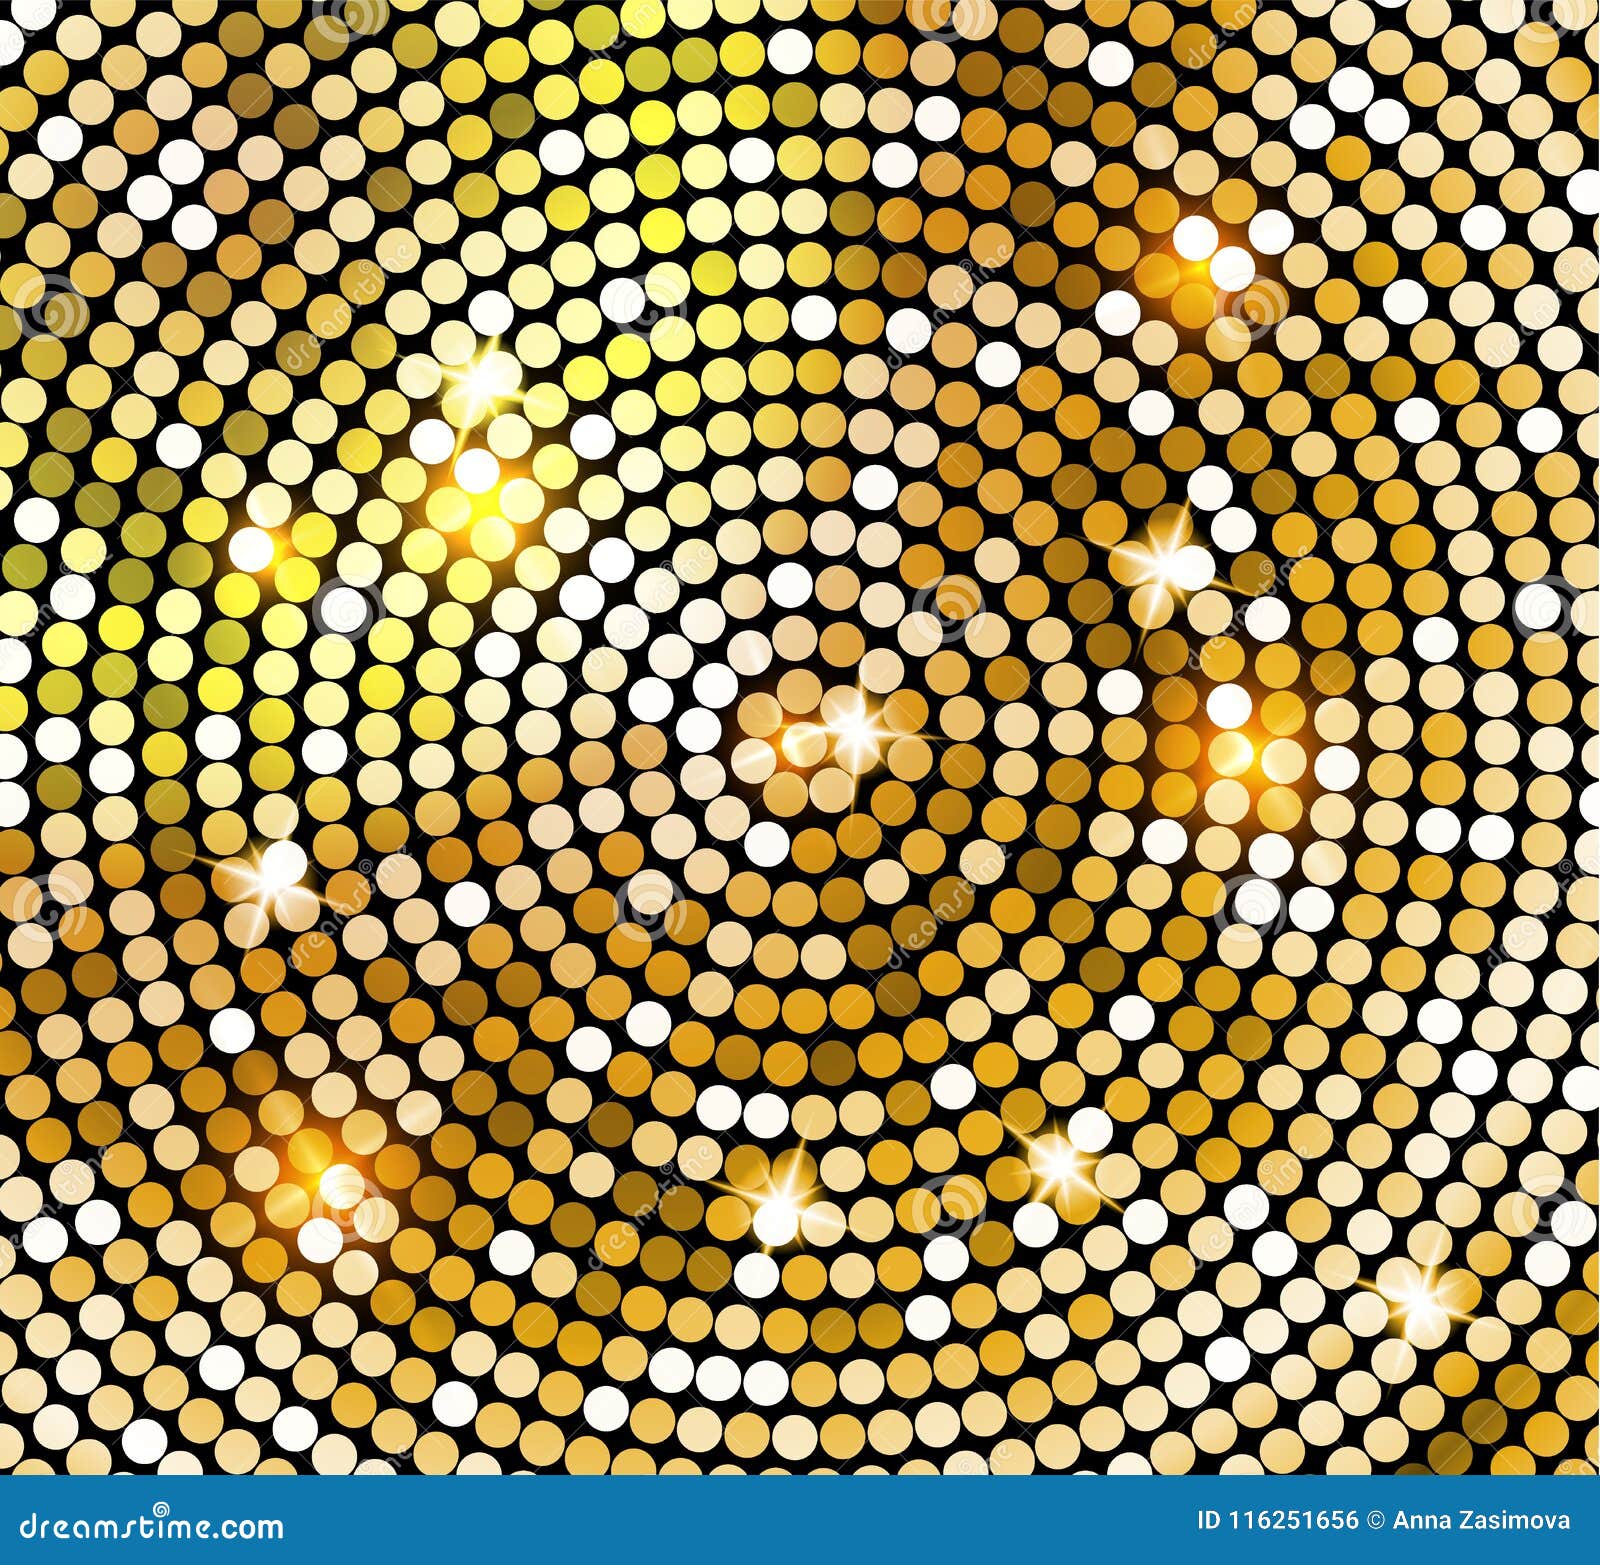 Golden Shiny Mosaic in Disco Ball Style. Vector Gold Disco Lights Background  Stock Illustration - Illustration of element, black: 116251656